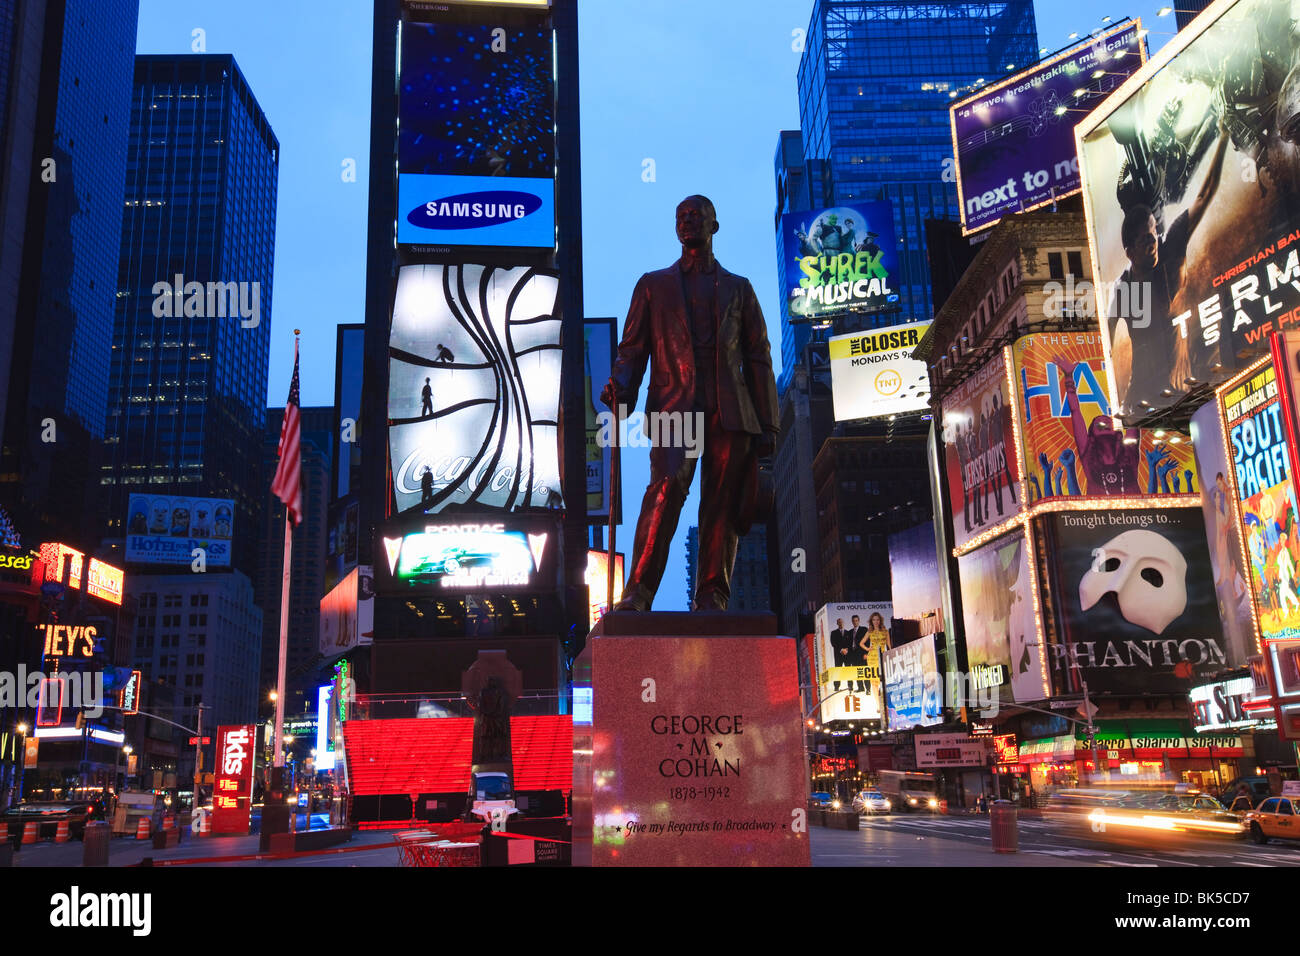 Statue of George M. Cohan, composer of Give My Regards to Broadway, Times Square, NYC Stock Photo